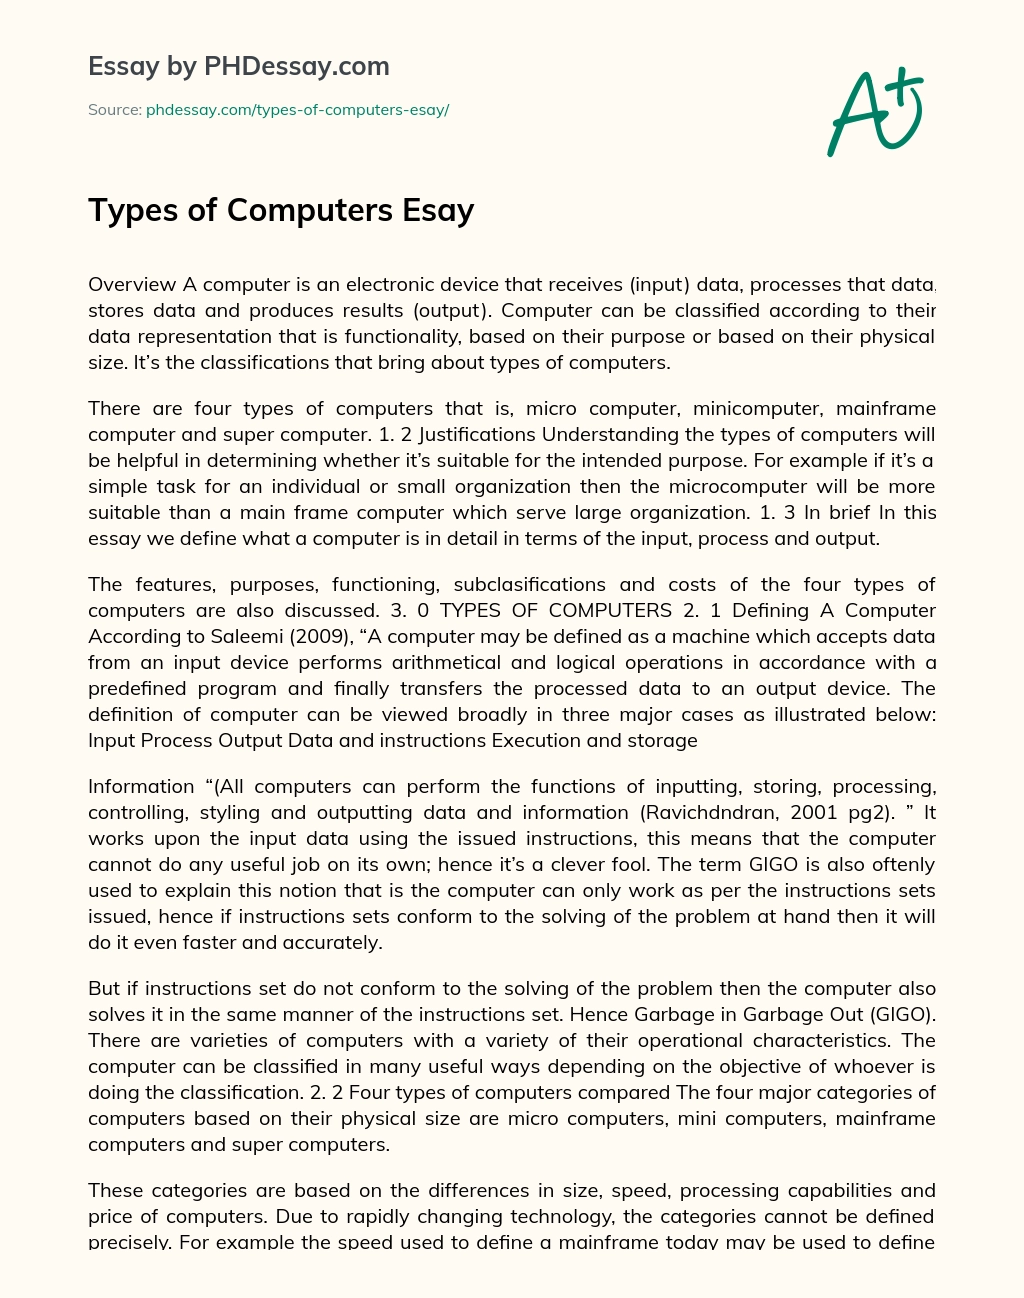 Types of Computers Esay essay